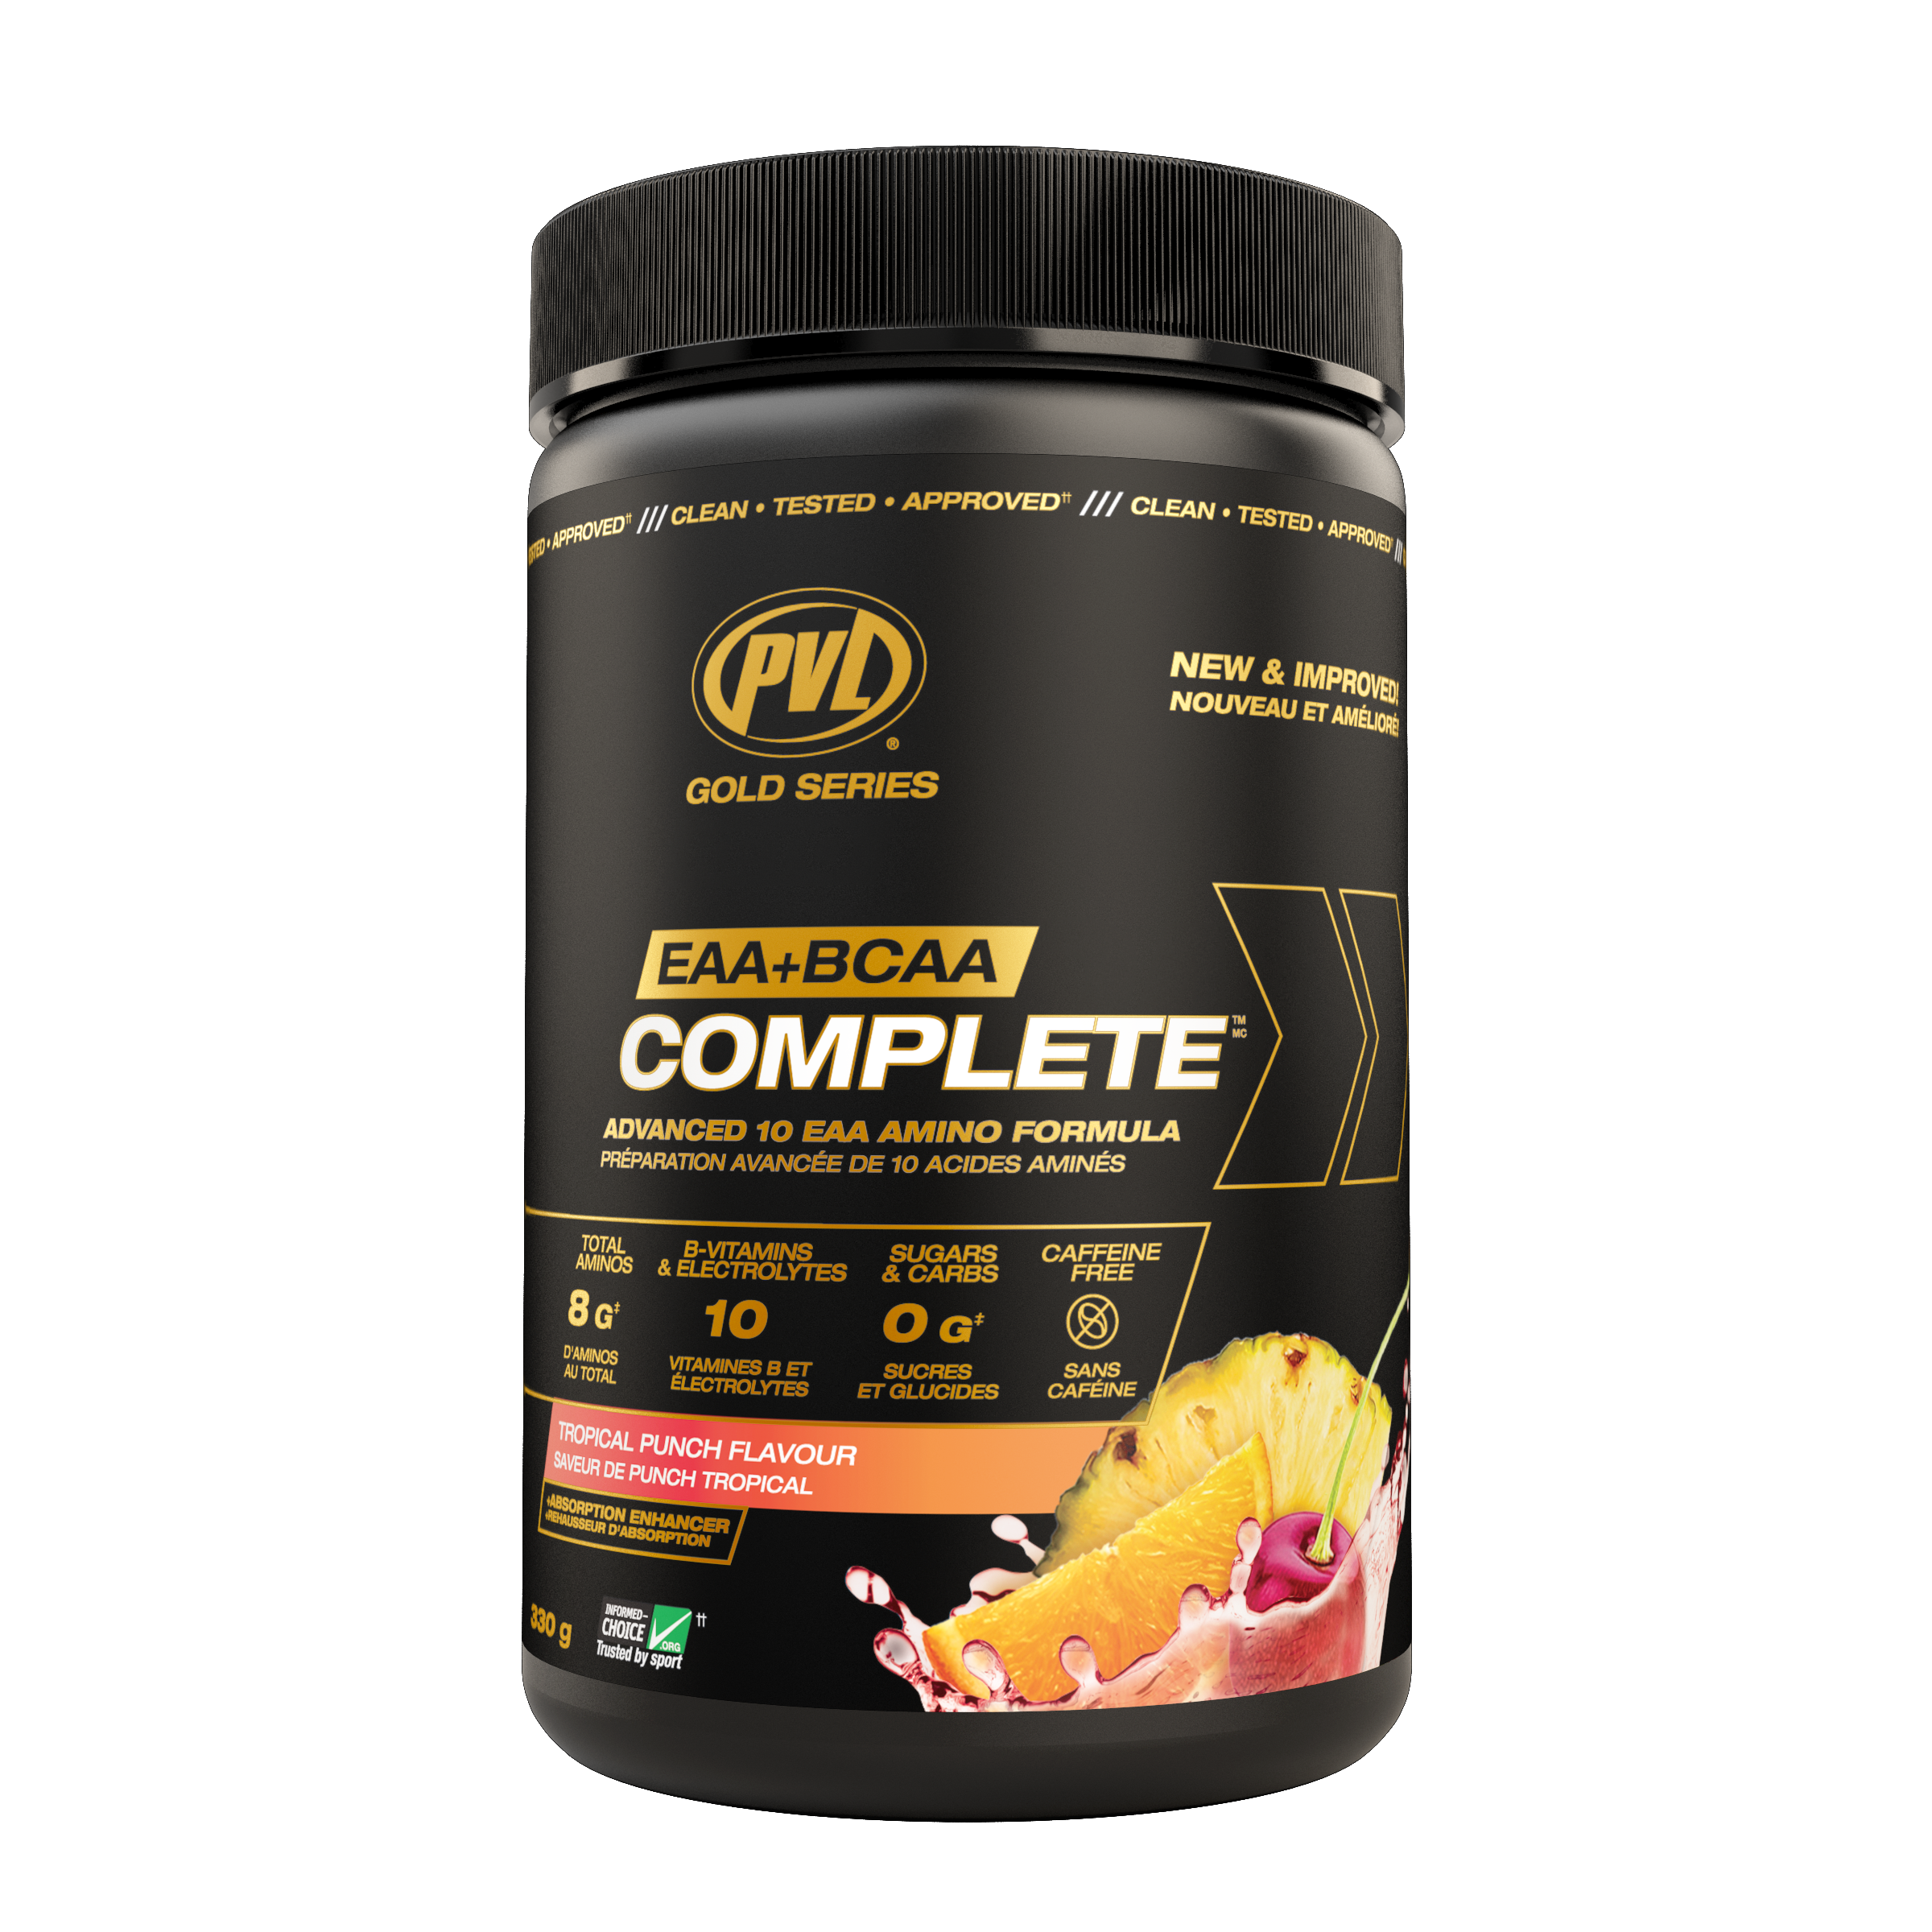 PVL EAA + BCAA Complete (330g) BCAAs and Amino Acids Tropical Punch Pure Vita Labs